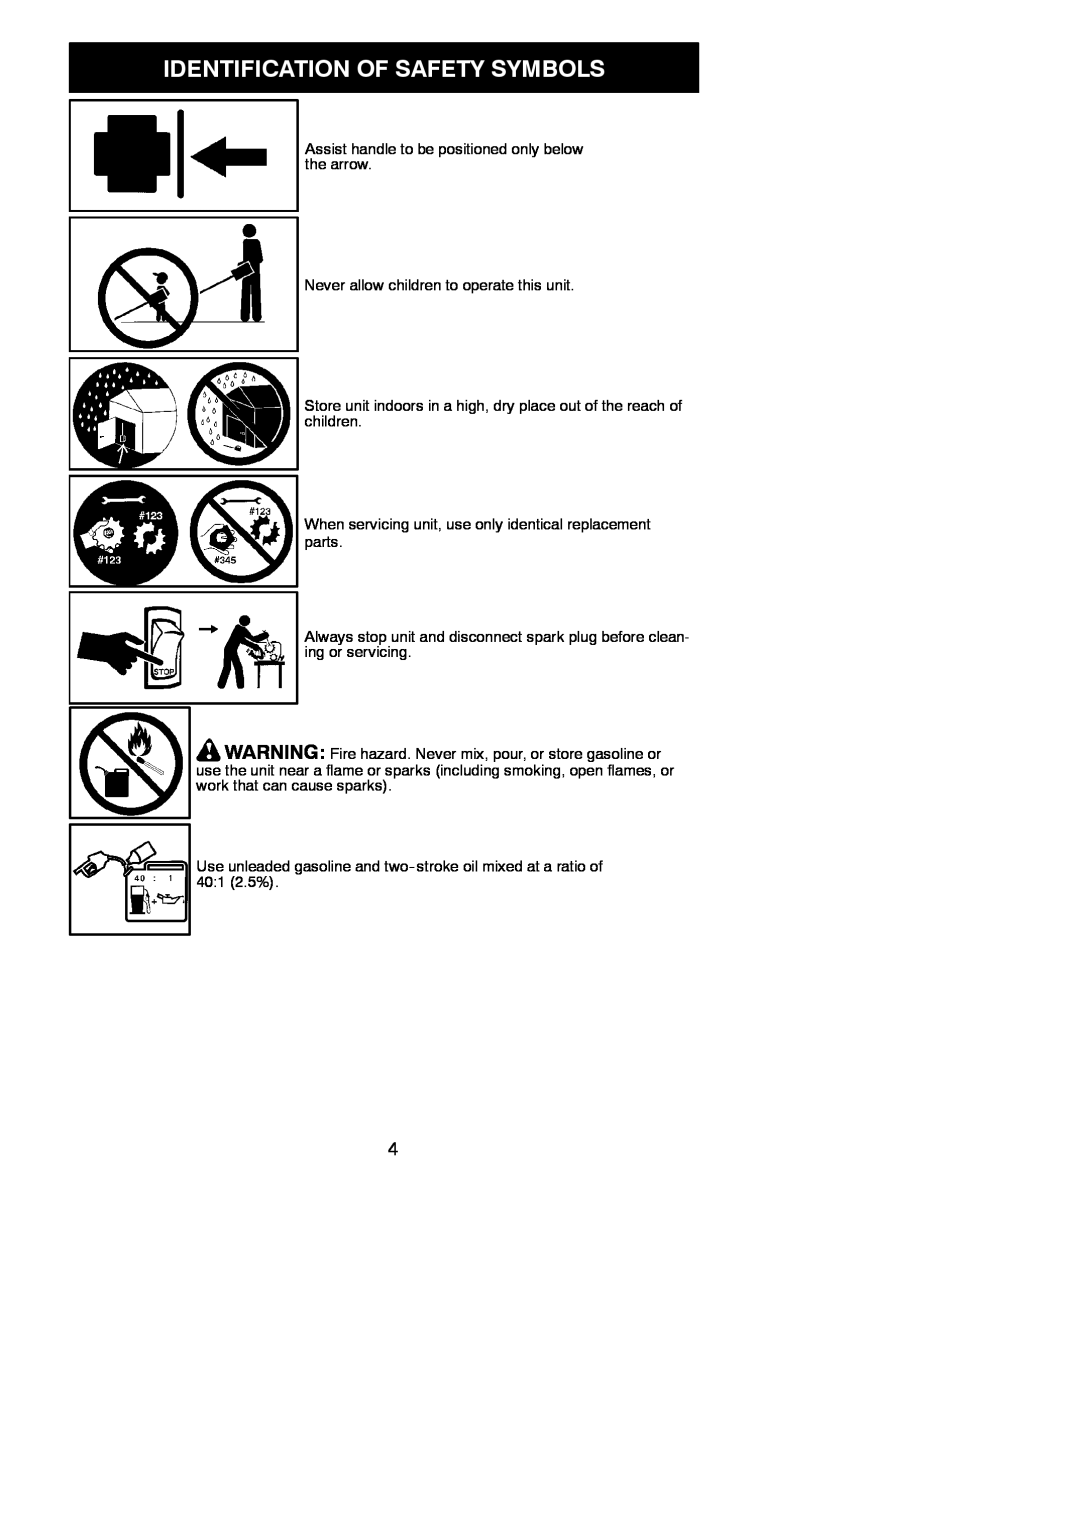 Poulan 966423701, 115244926 Identification Of Safety Symbols, Assist handle to be positioned only below the arrow 